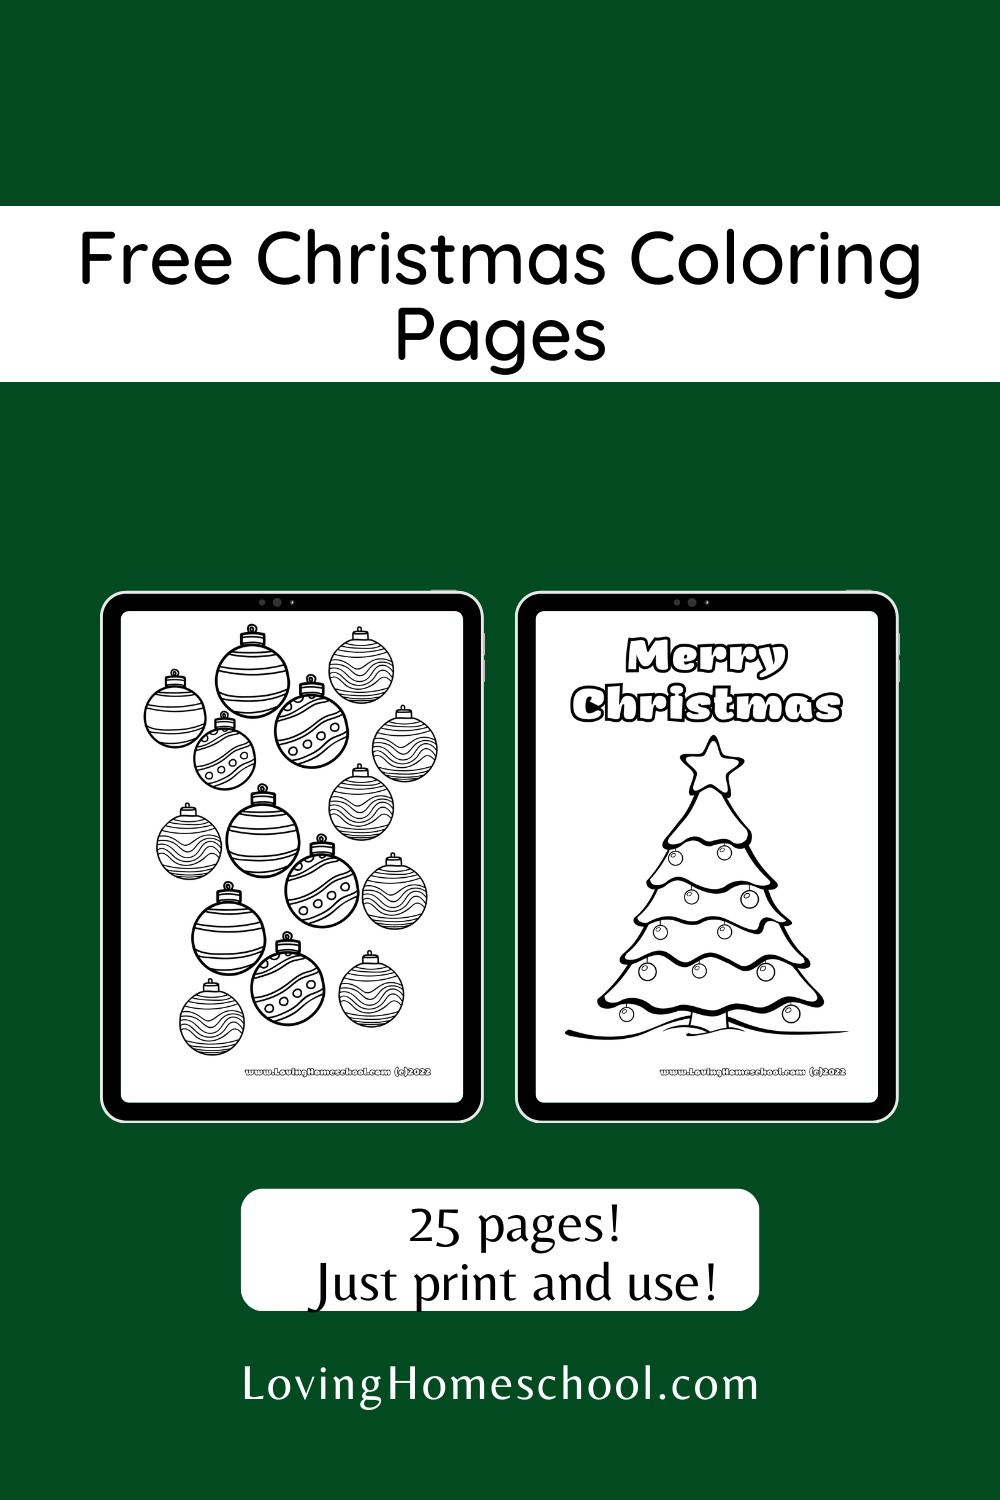 Free Christmas Coloring Pages Pinterest Pin